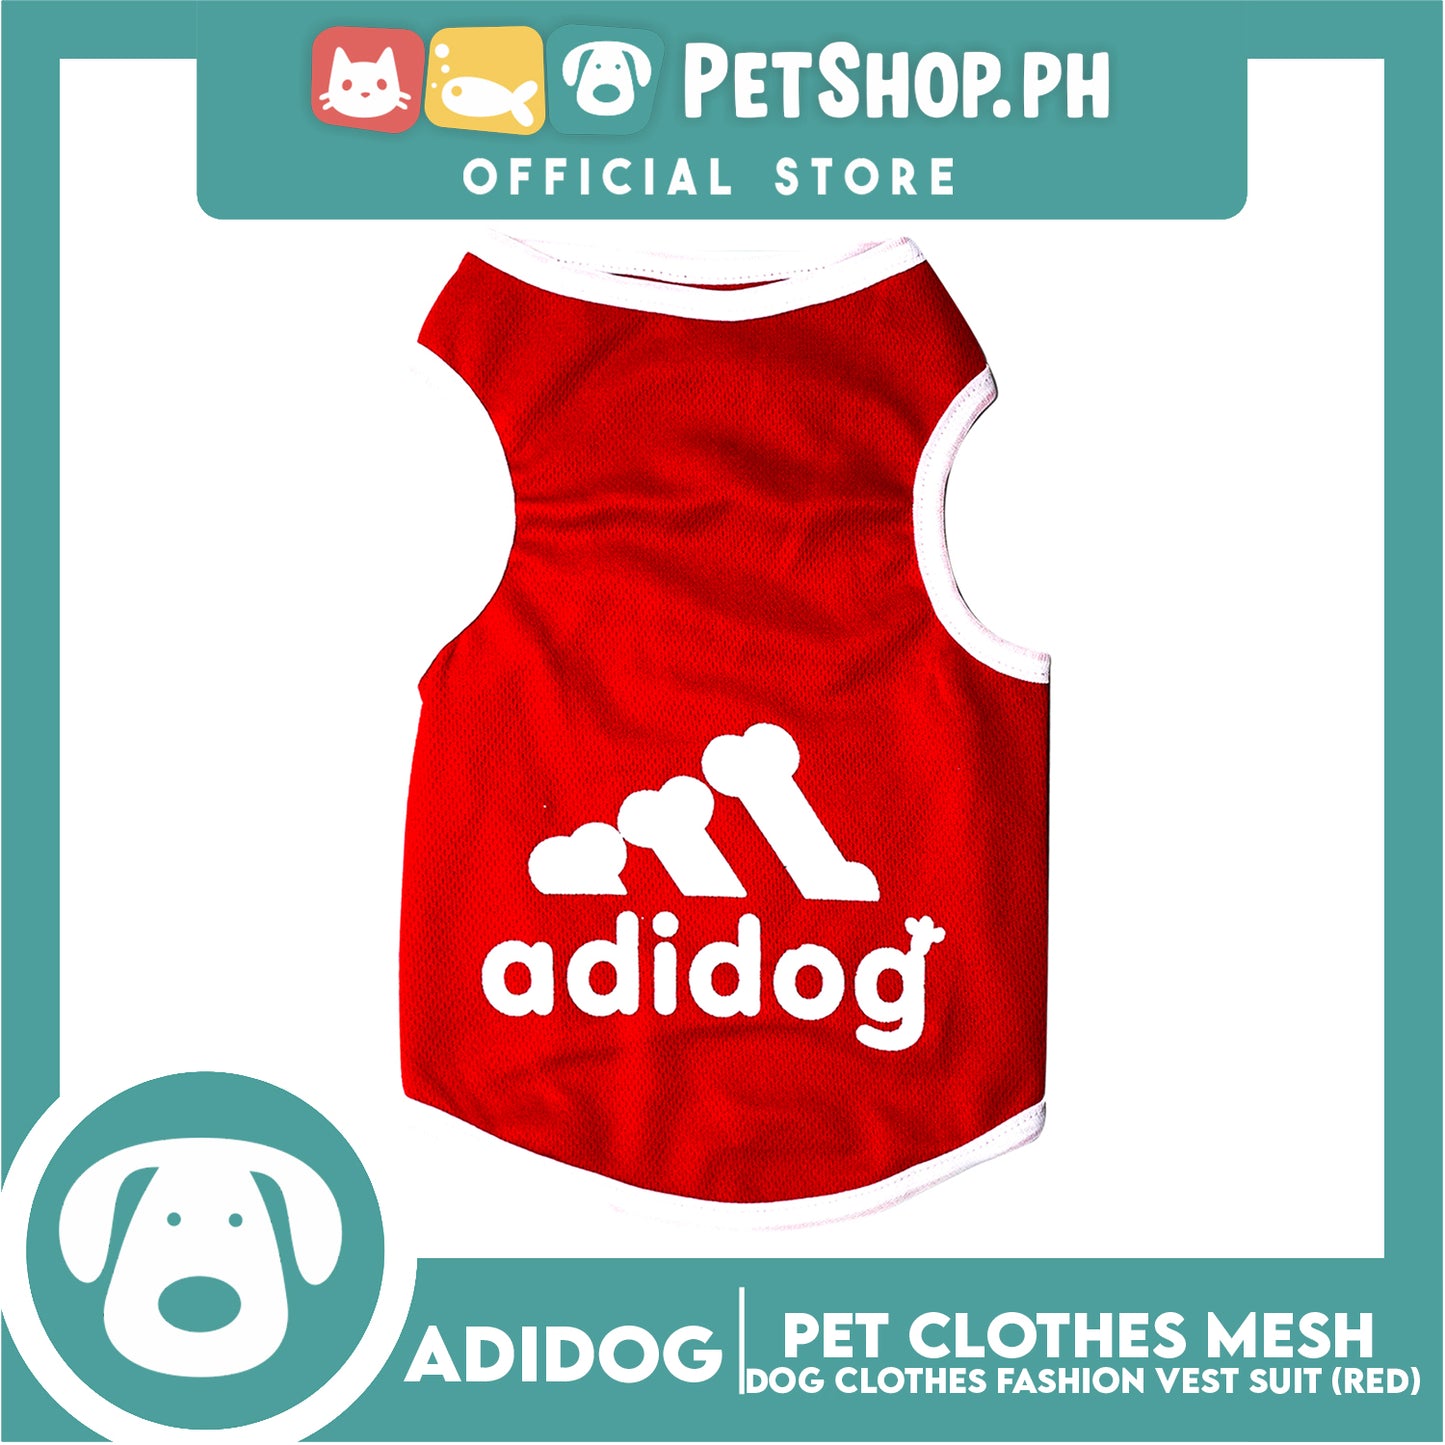 Adidog Pet Clothes Mesh Vet, Summer Dog Clothes, Breathable Mesh Vet, Dog Shirt, Pet Jersey, Fashion Vest Suit for Dogs (Red) (Small.)